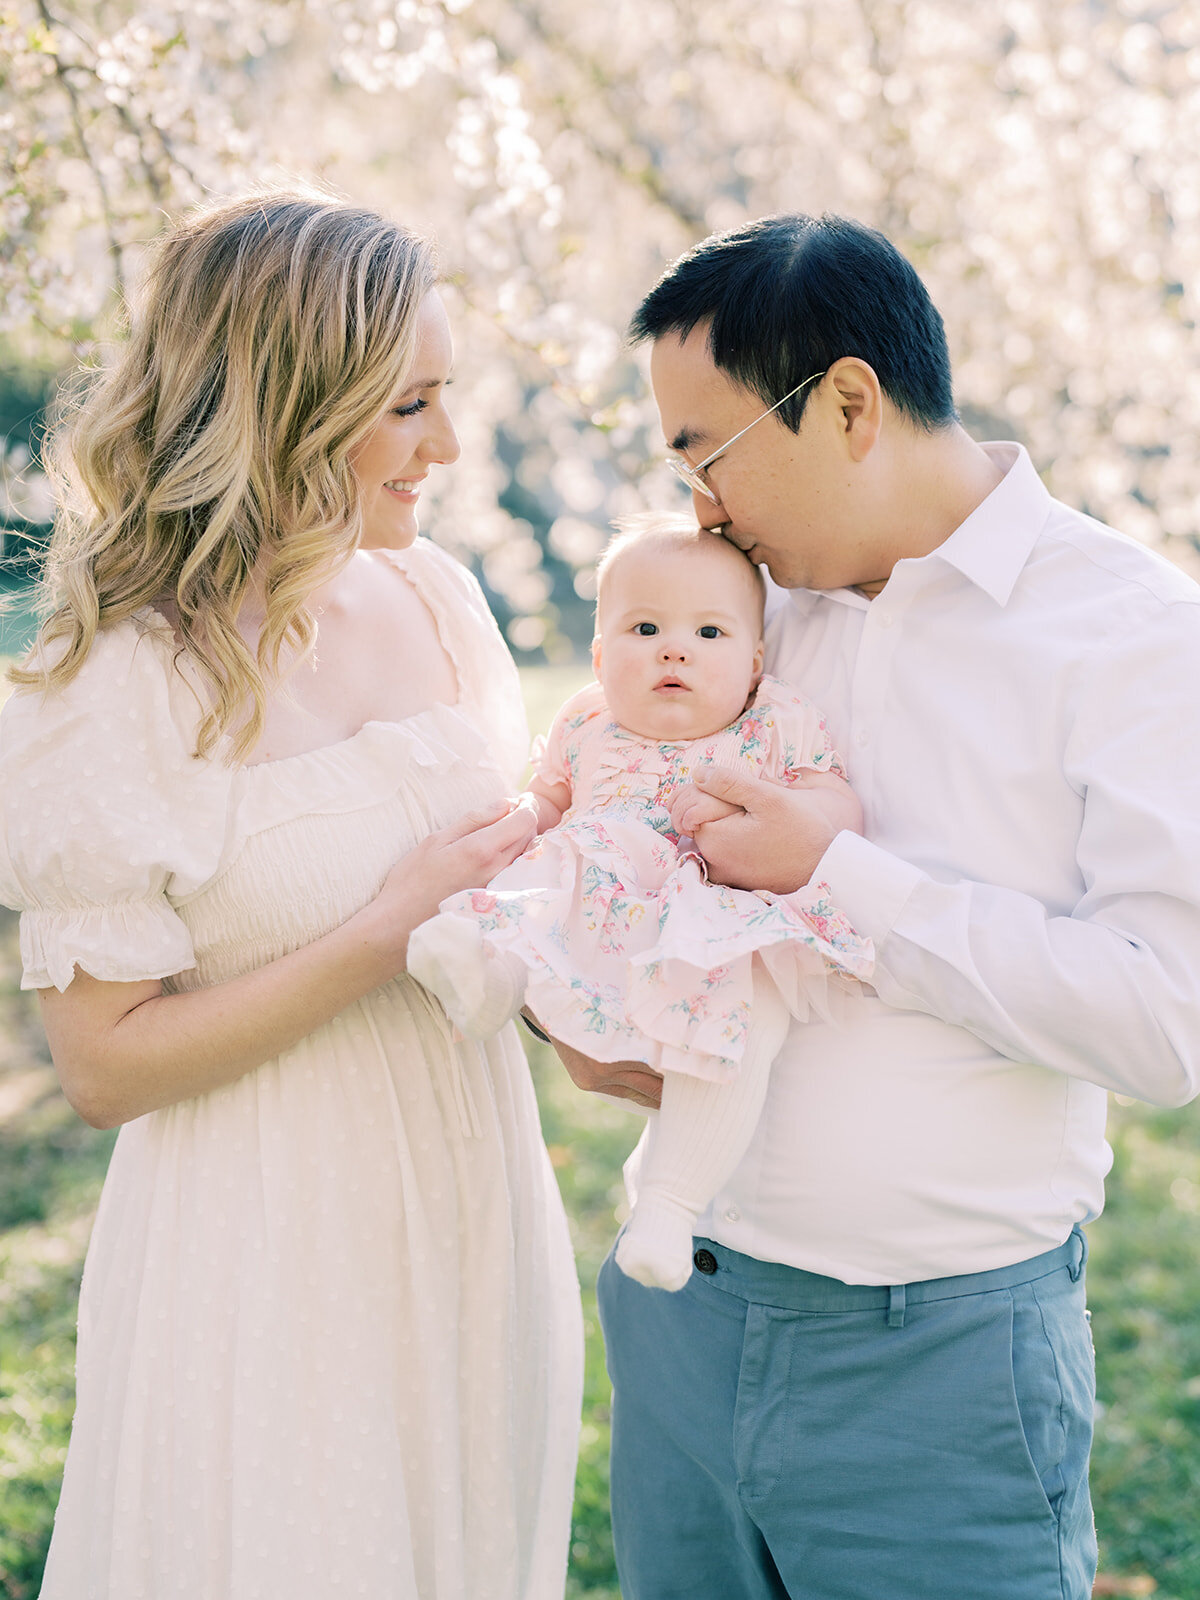 Blonde mother and Asian father hold their little girl in front of cherry blossom tree as father kisses baby's head.